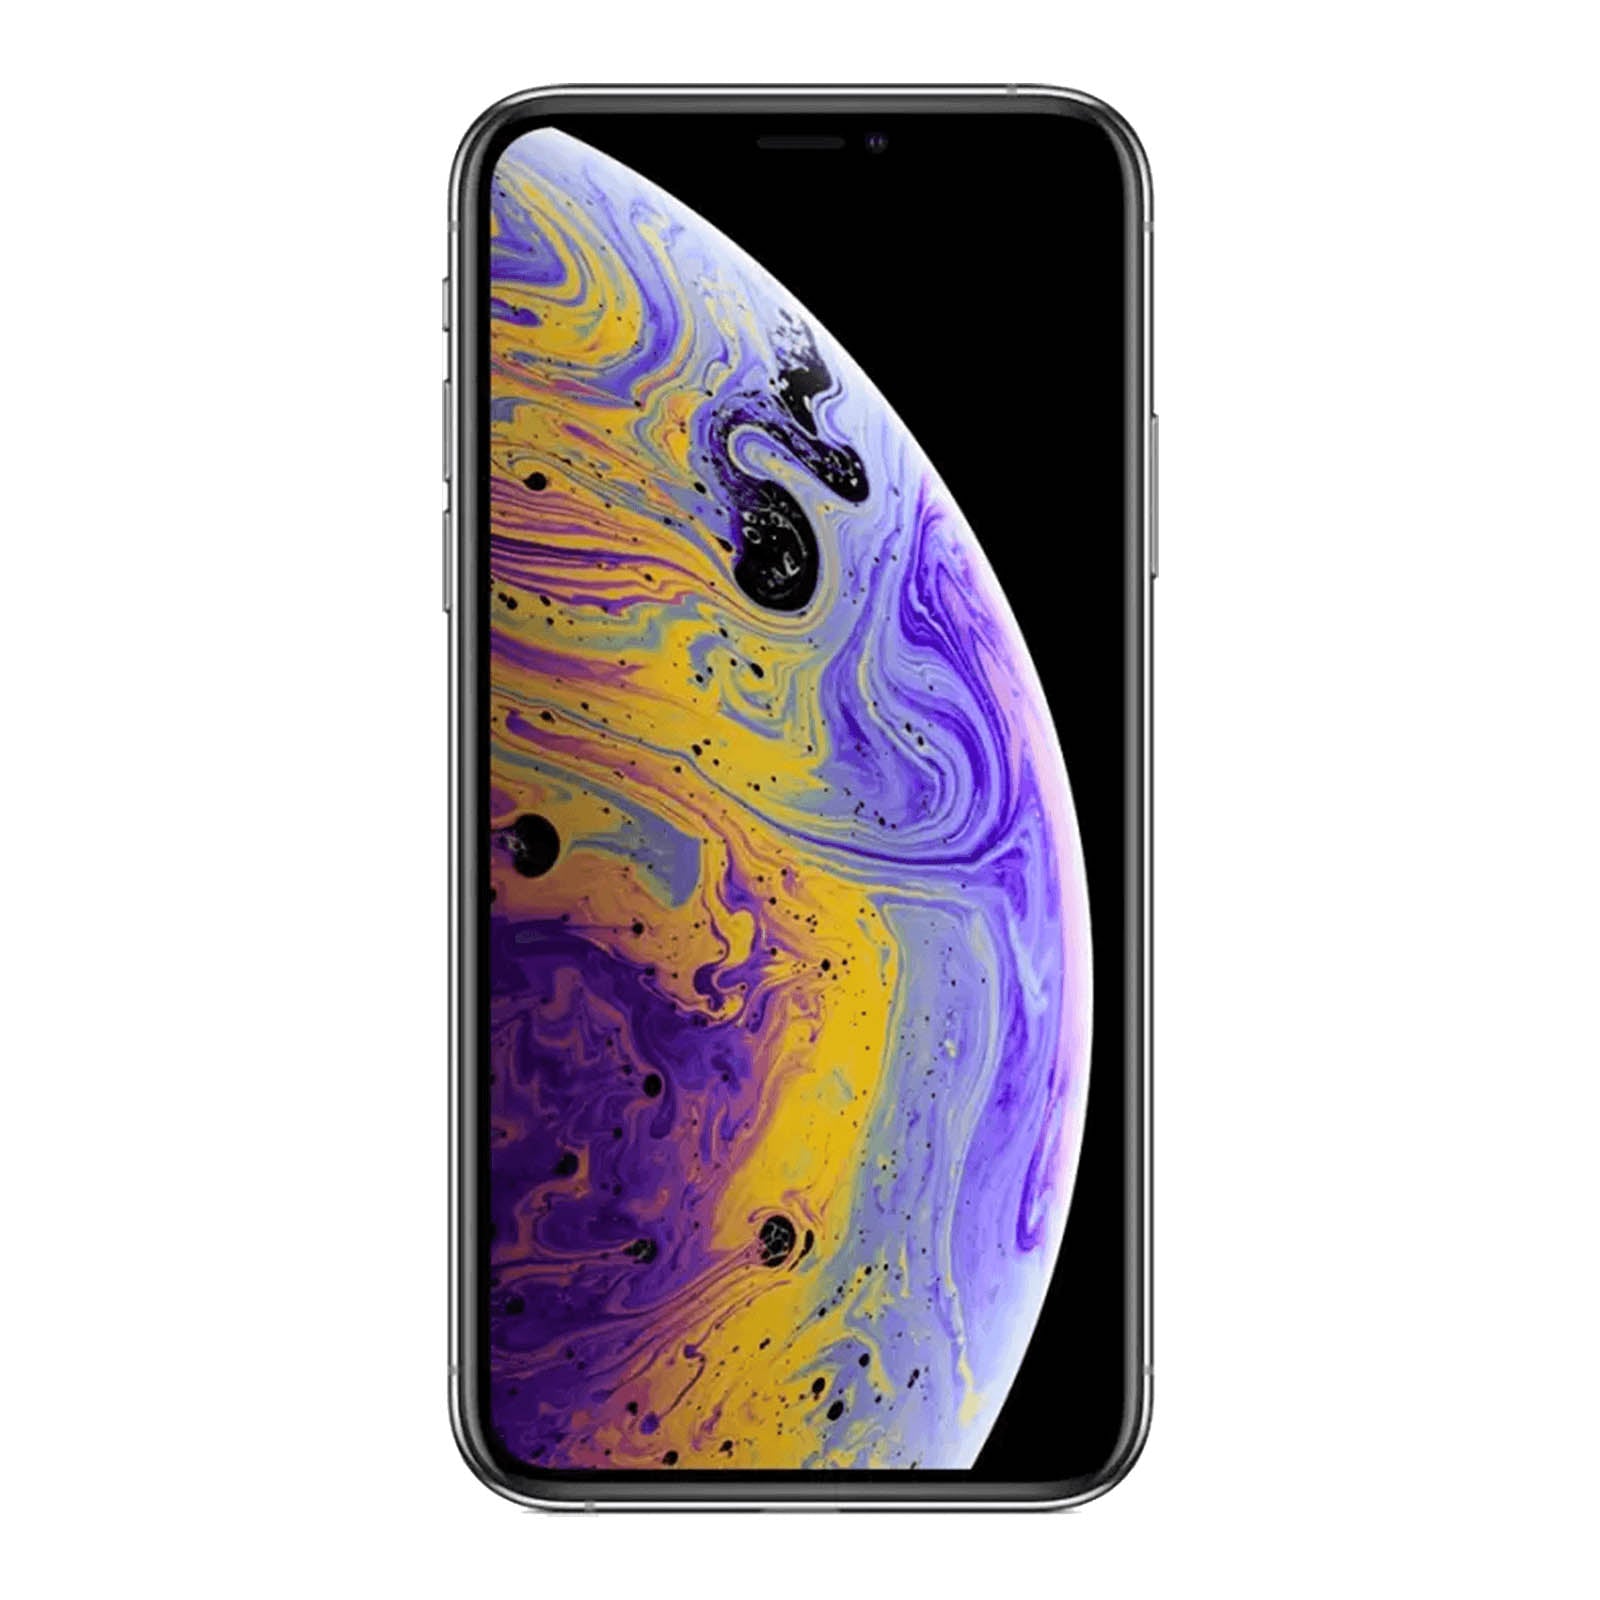 Apple iPhone XS 64GB Silver Fair - T-Mobile